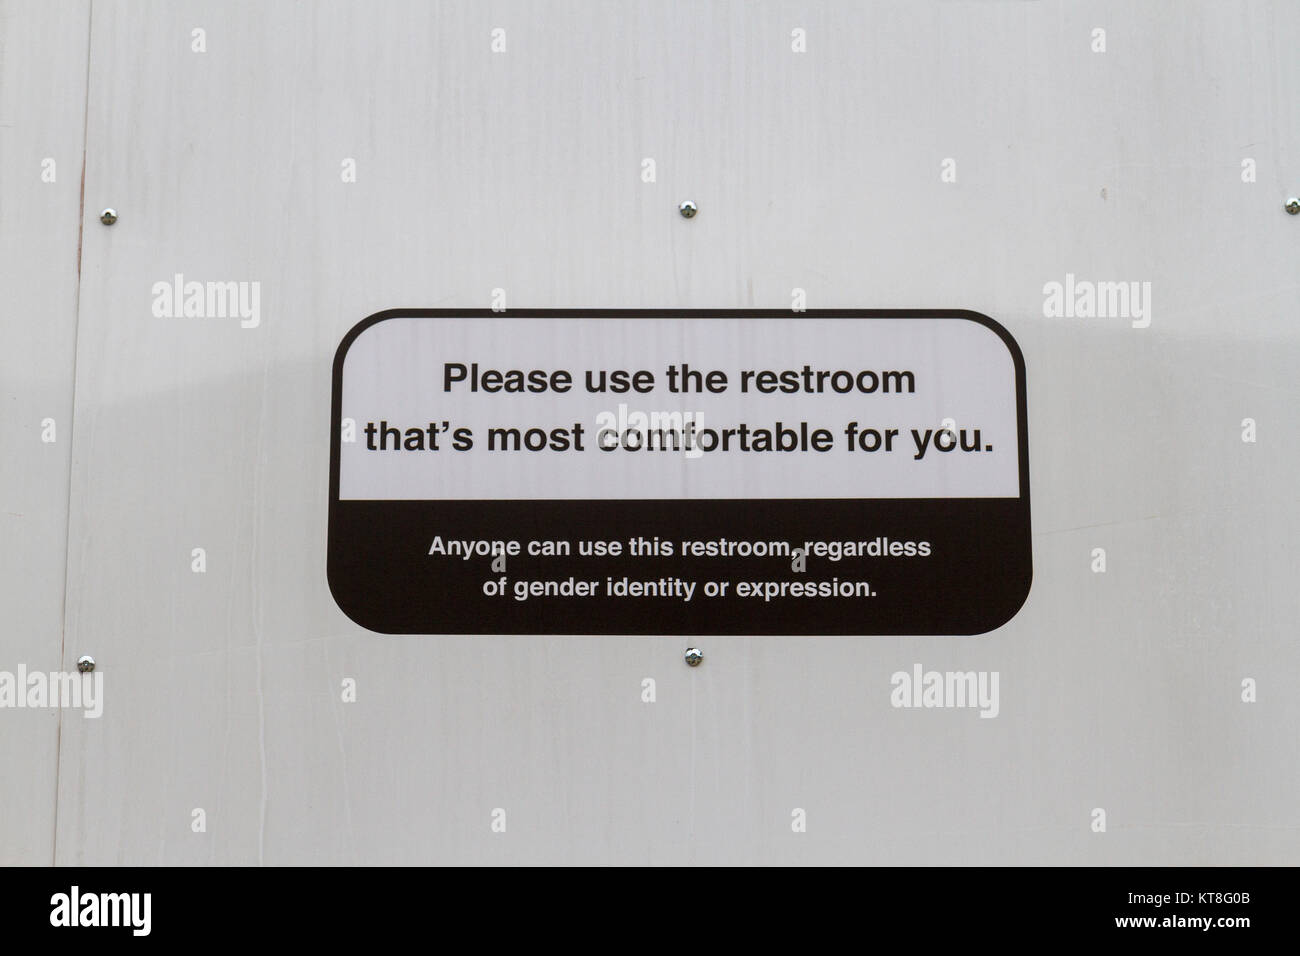 'Please use the restroom that's most comfortable for you': Sign on public restroom in Philadelphia, Pennsylvania, United States. Stock Photo